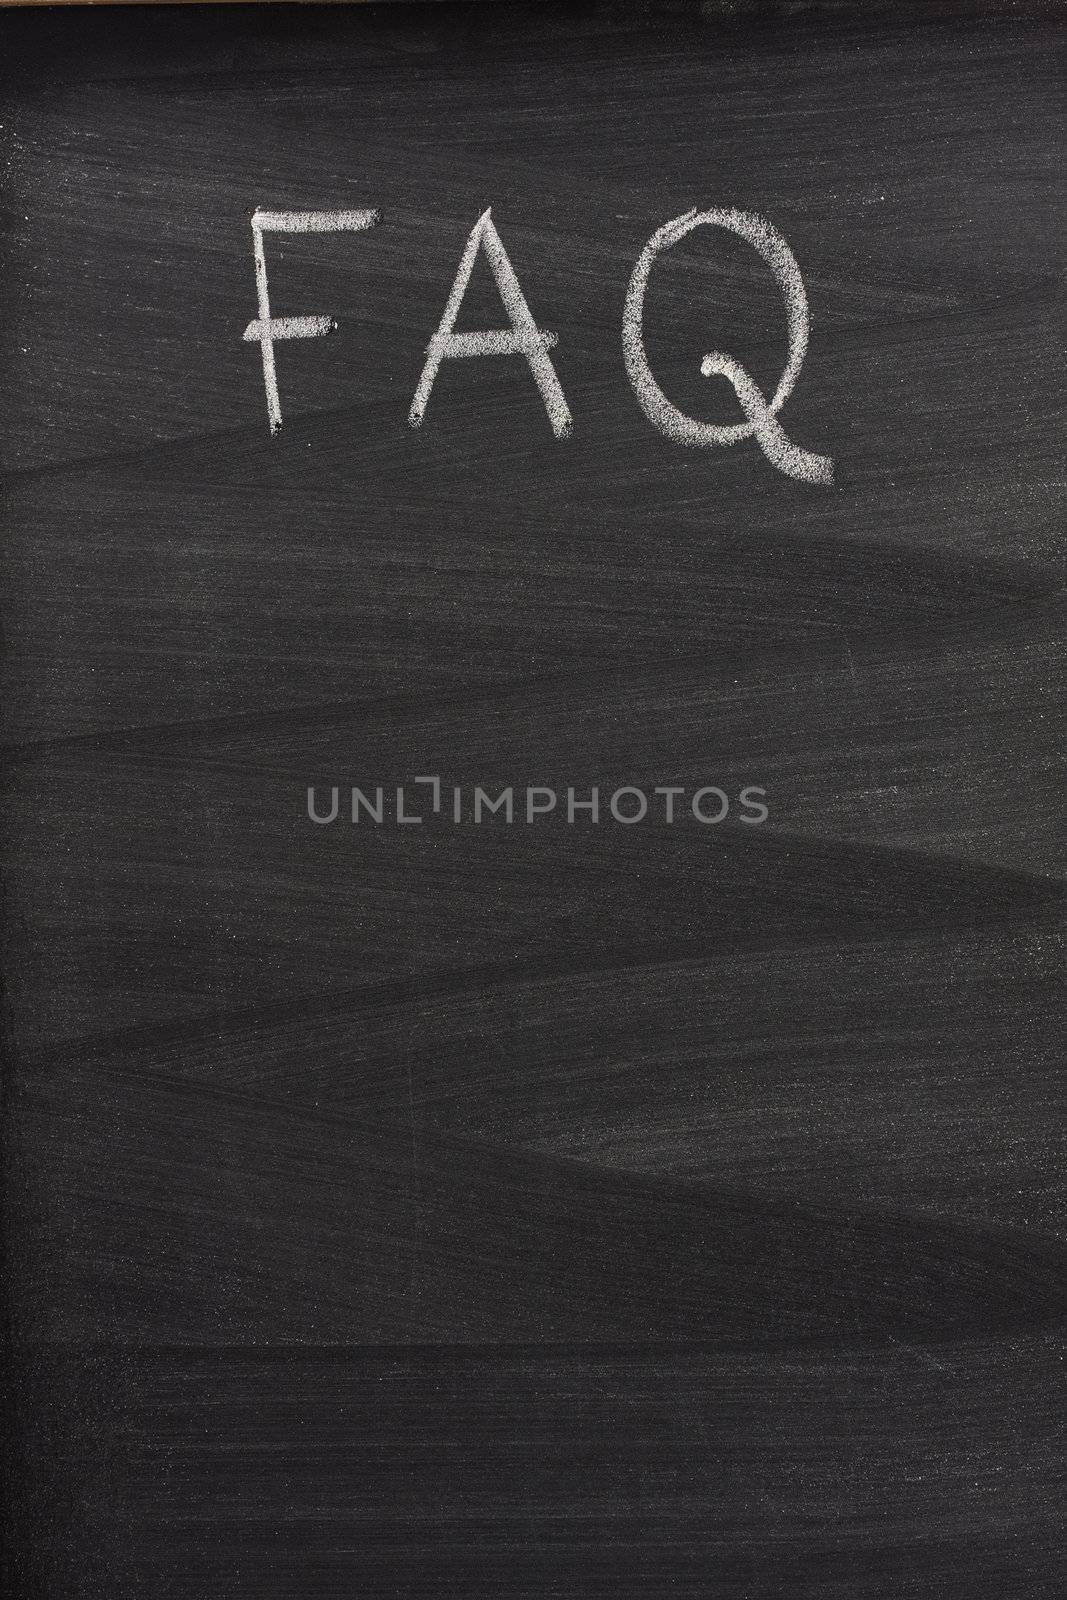 frequently asked questions (FAQ) on a blackboard by PixelsAway